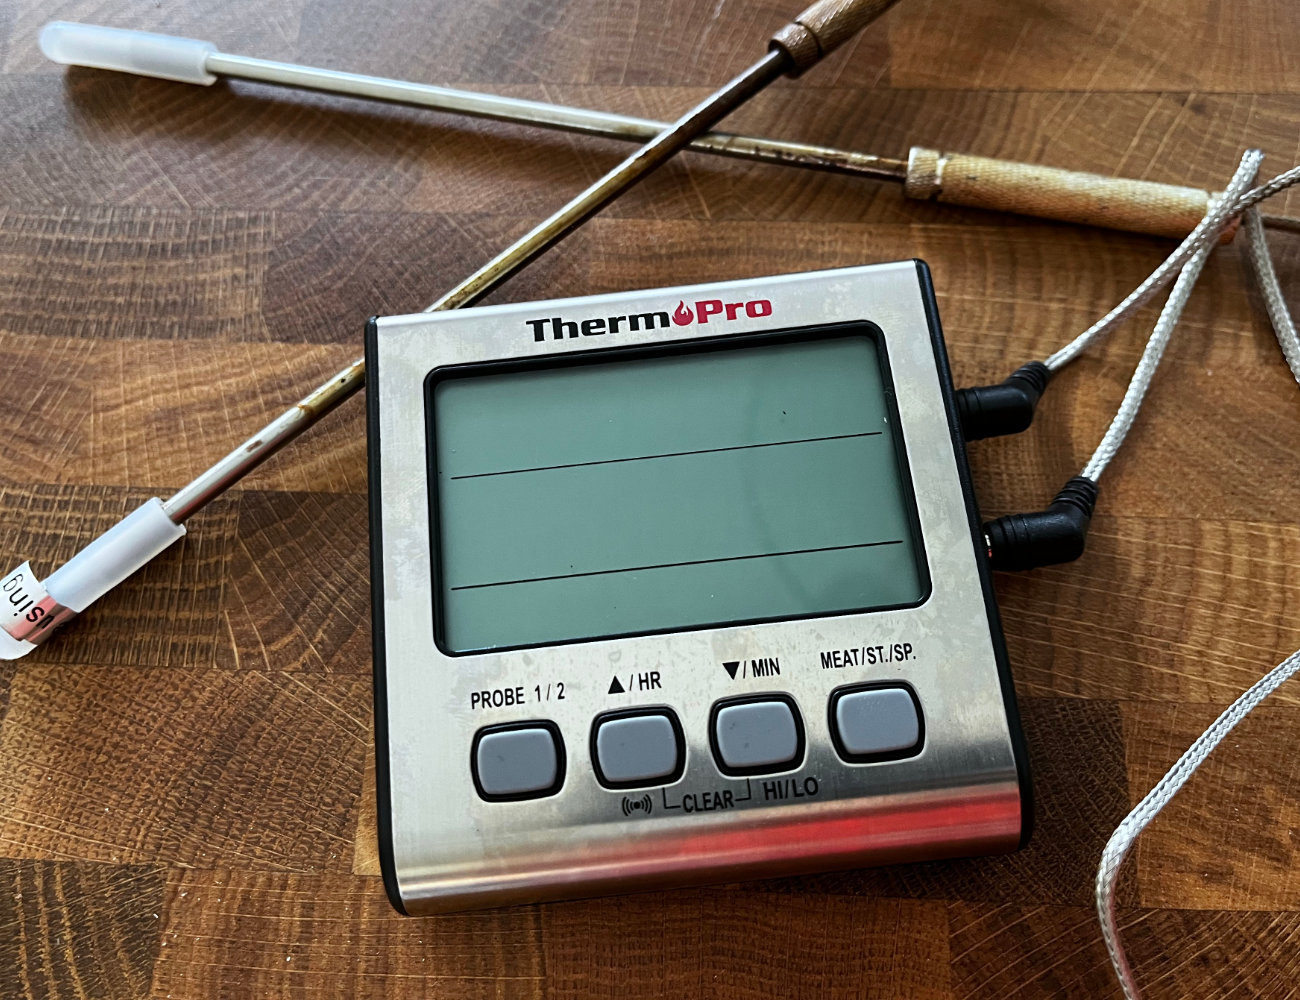 Dual Probe Digital Meat Thermometer: Take the guesswork out of